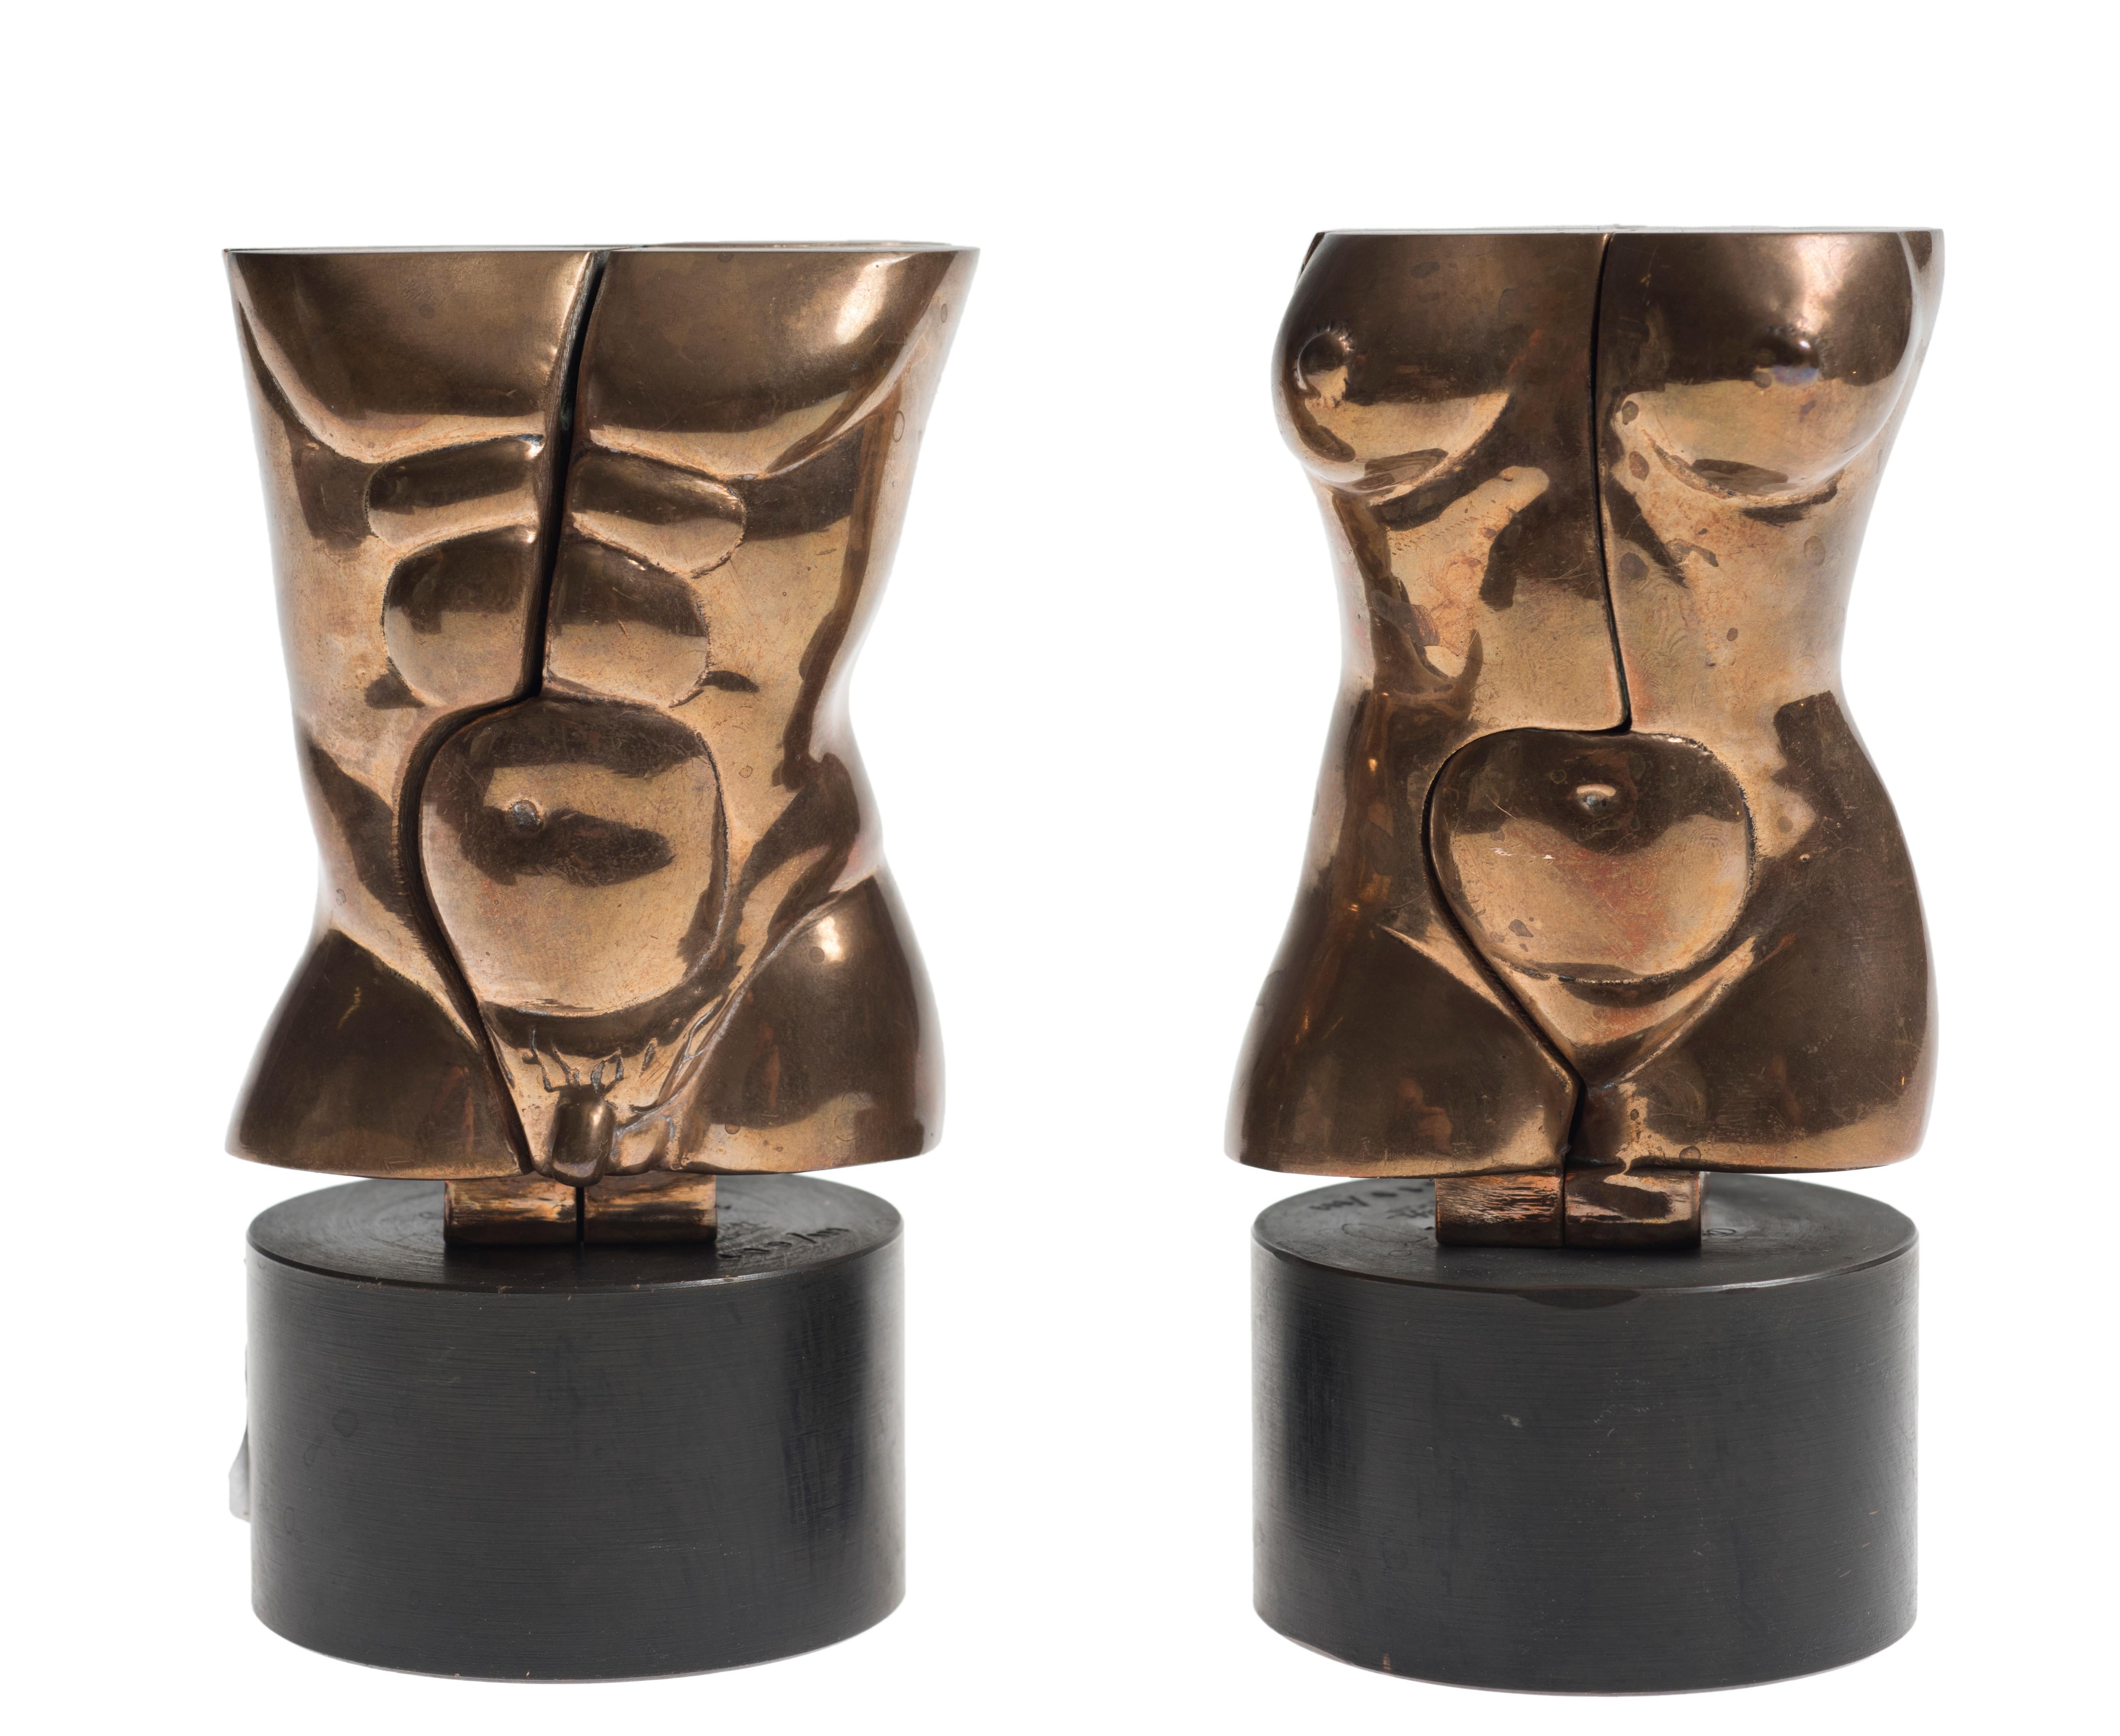 Miguel Berrocal Nude Sculpture - Otto/Opus 348 and Otra/Opus 349 - Bronze Sculpture by M. Berrocal